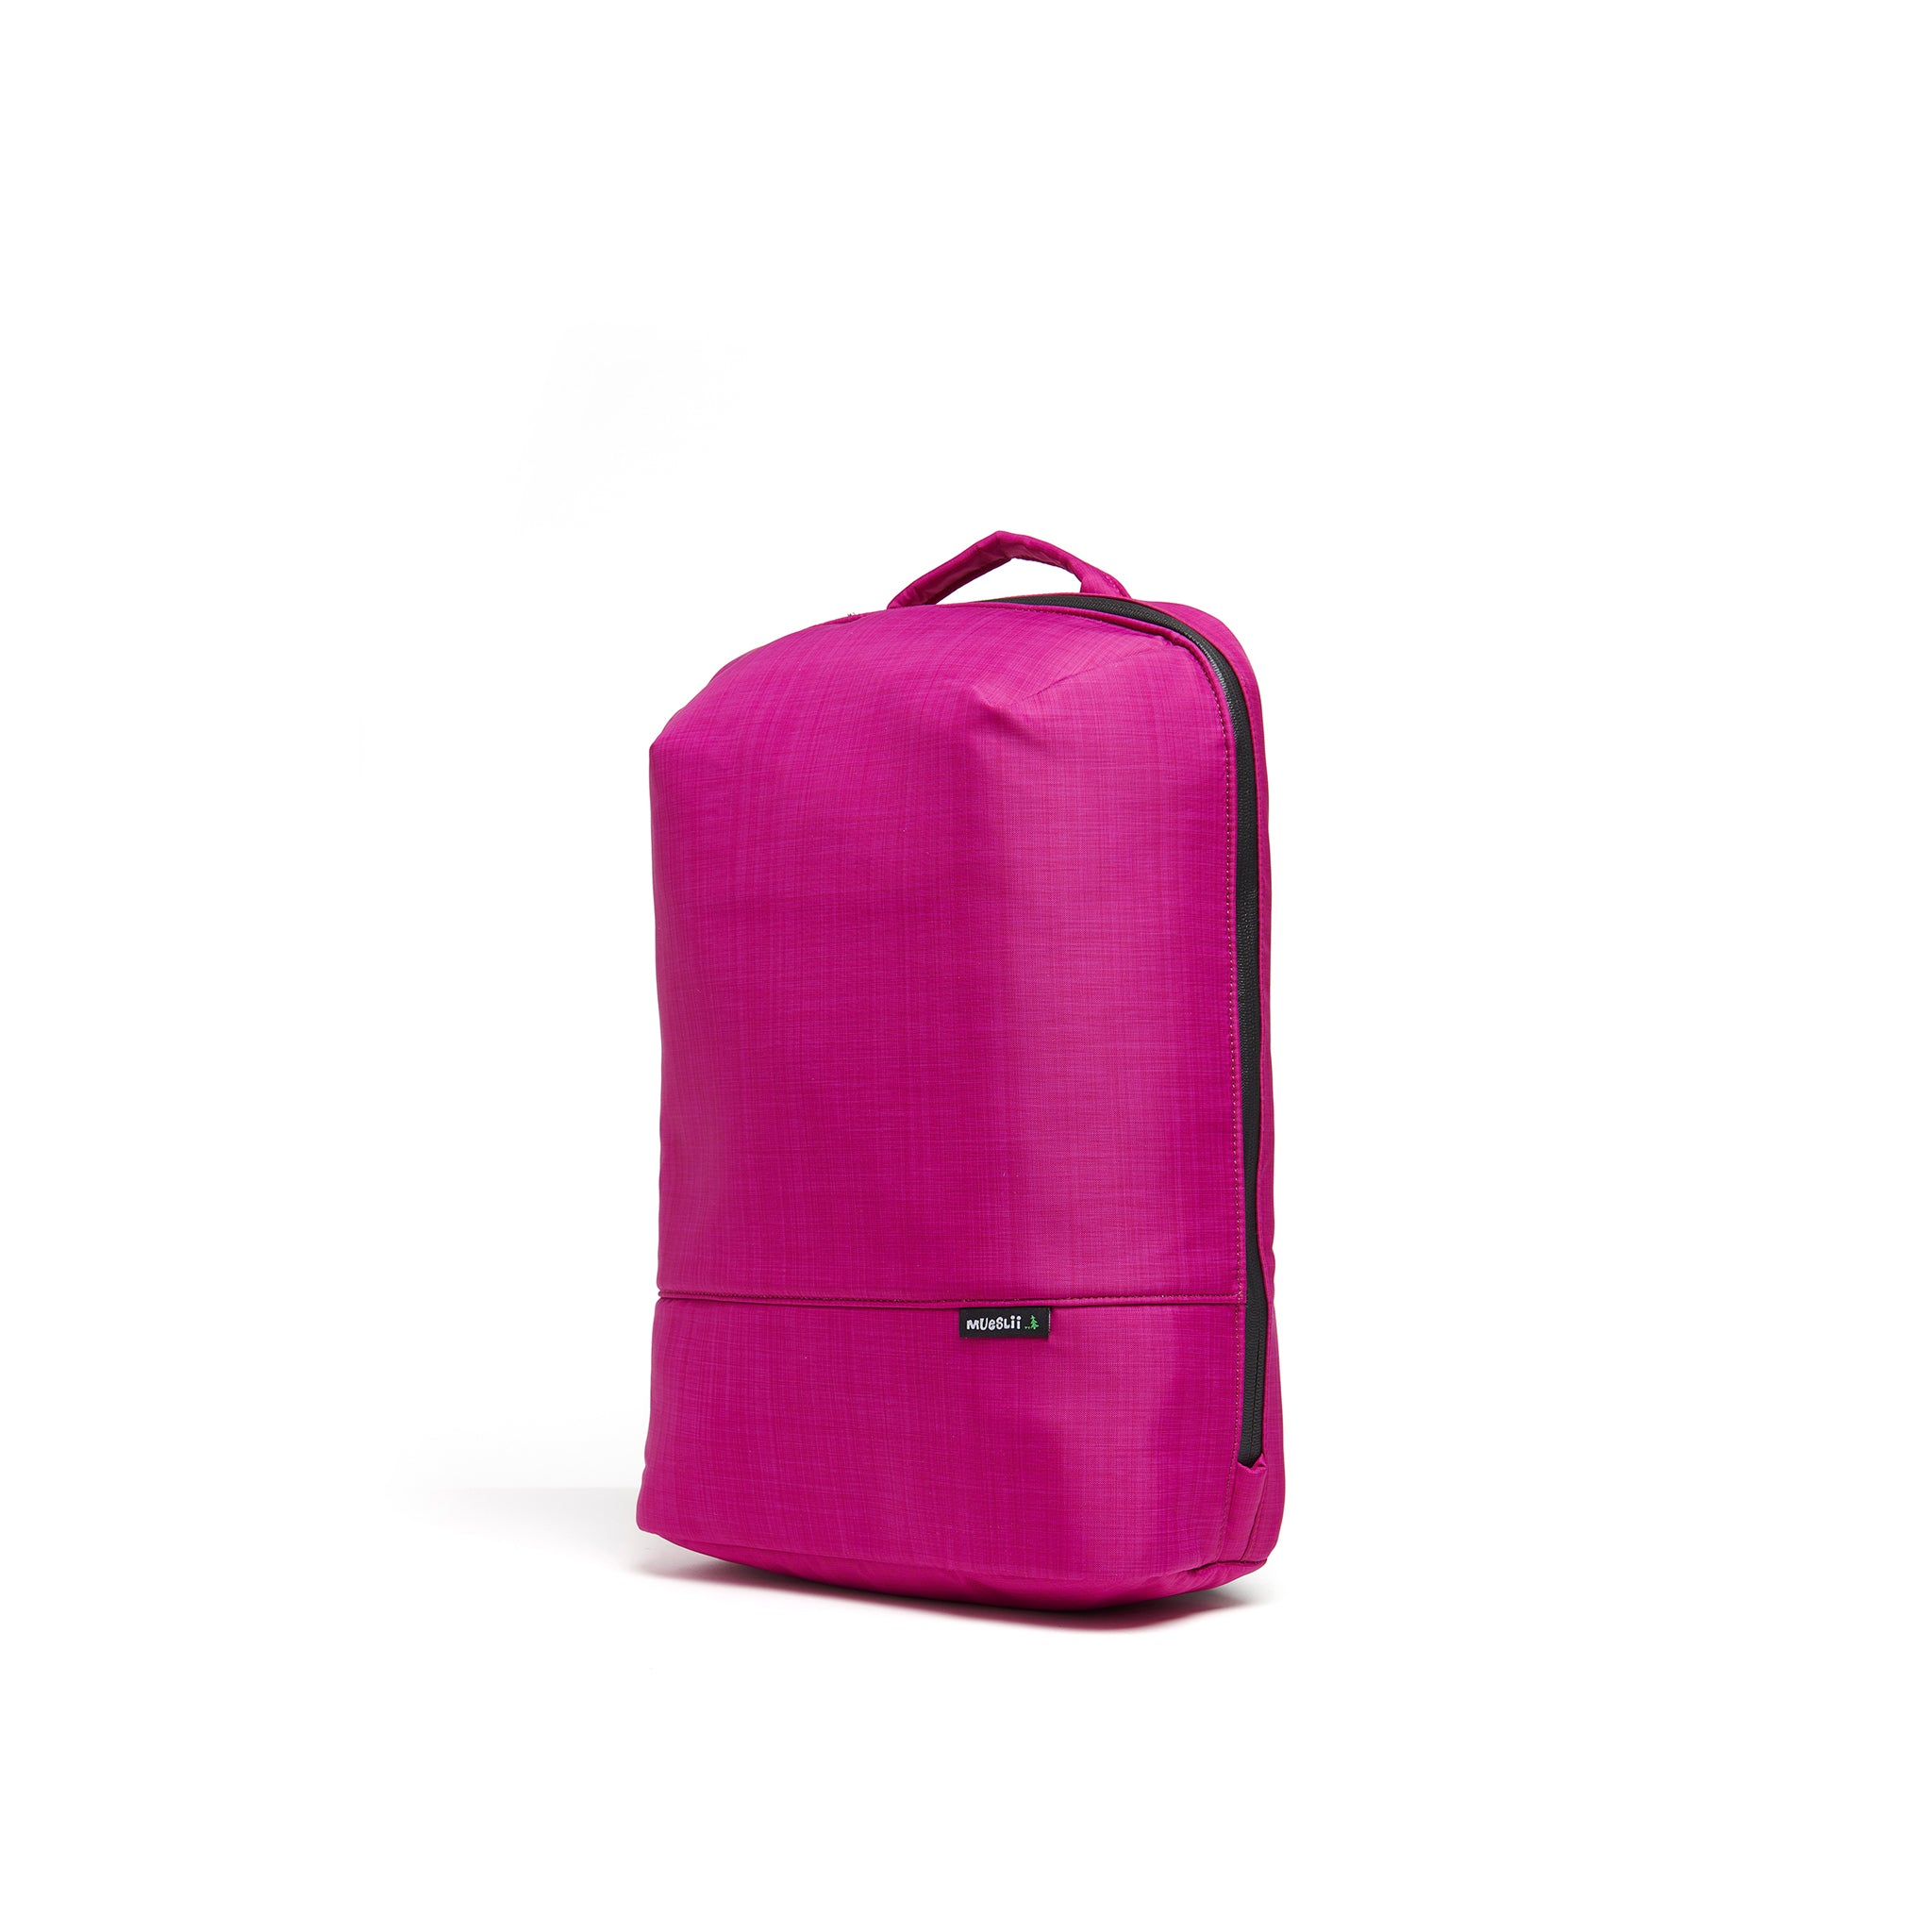 Mueslii small backpack,  made of  water resistant canvas nylon,  with a laptop compartment, color fuchsia, side view.